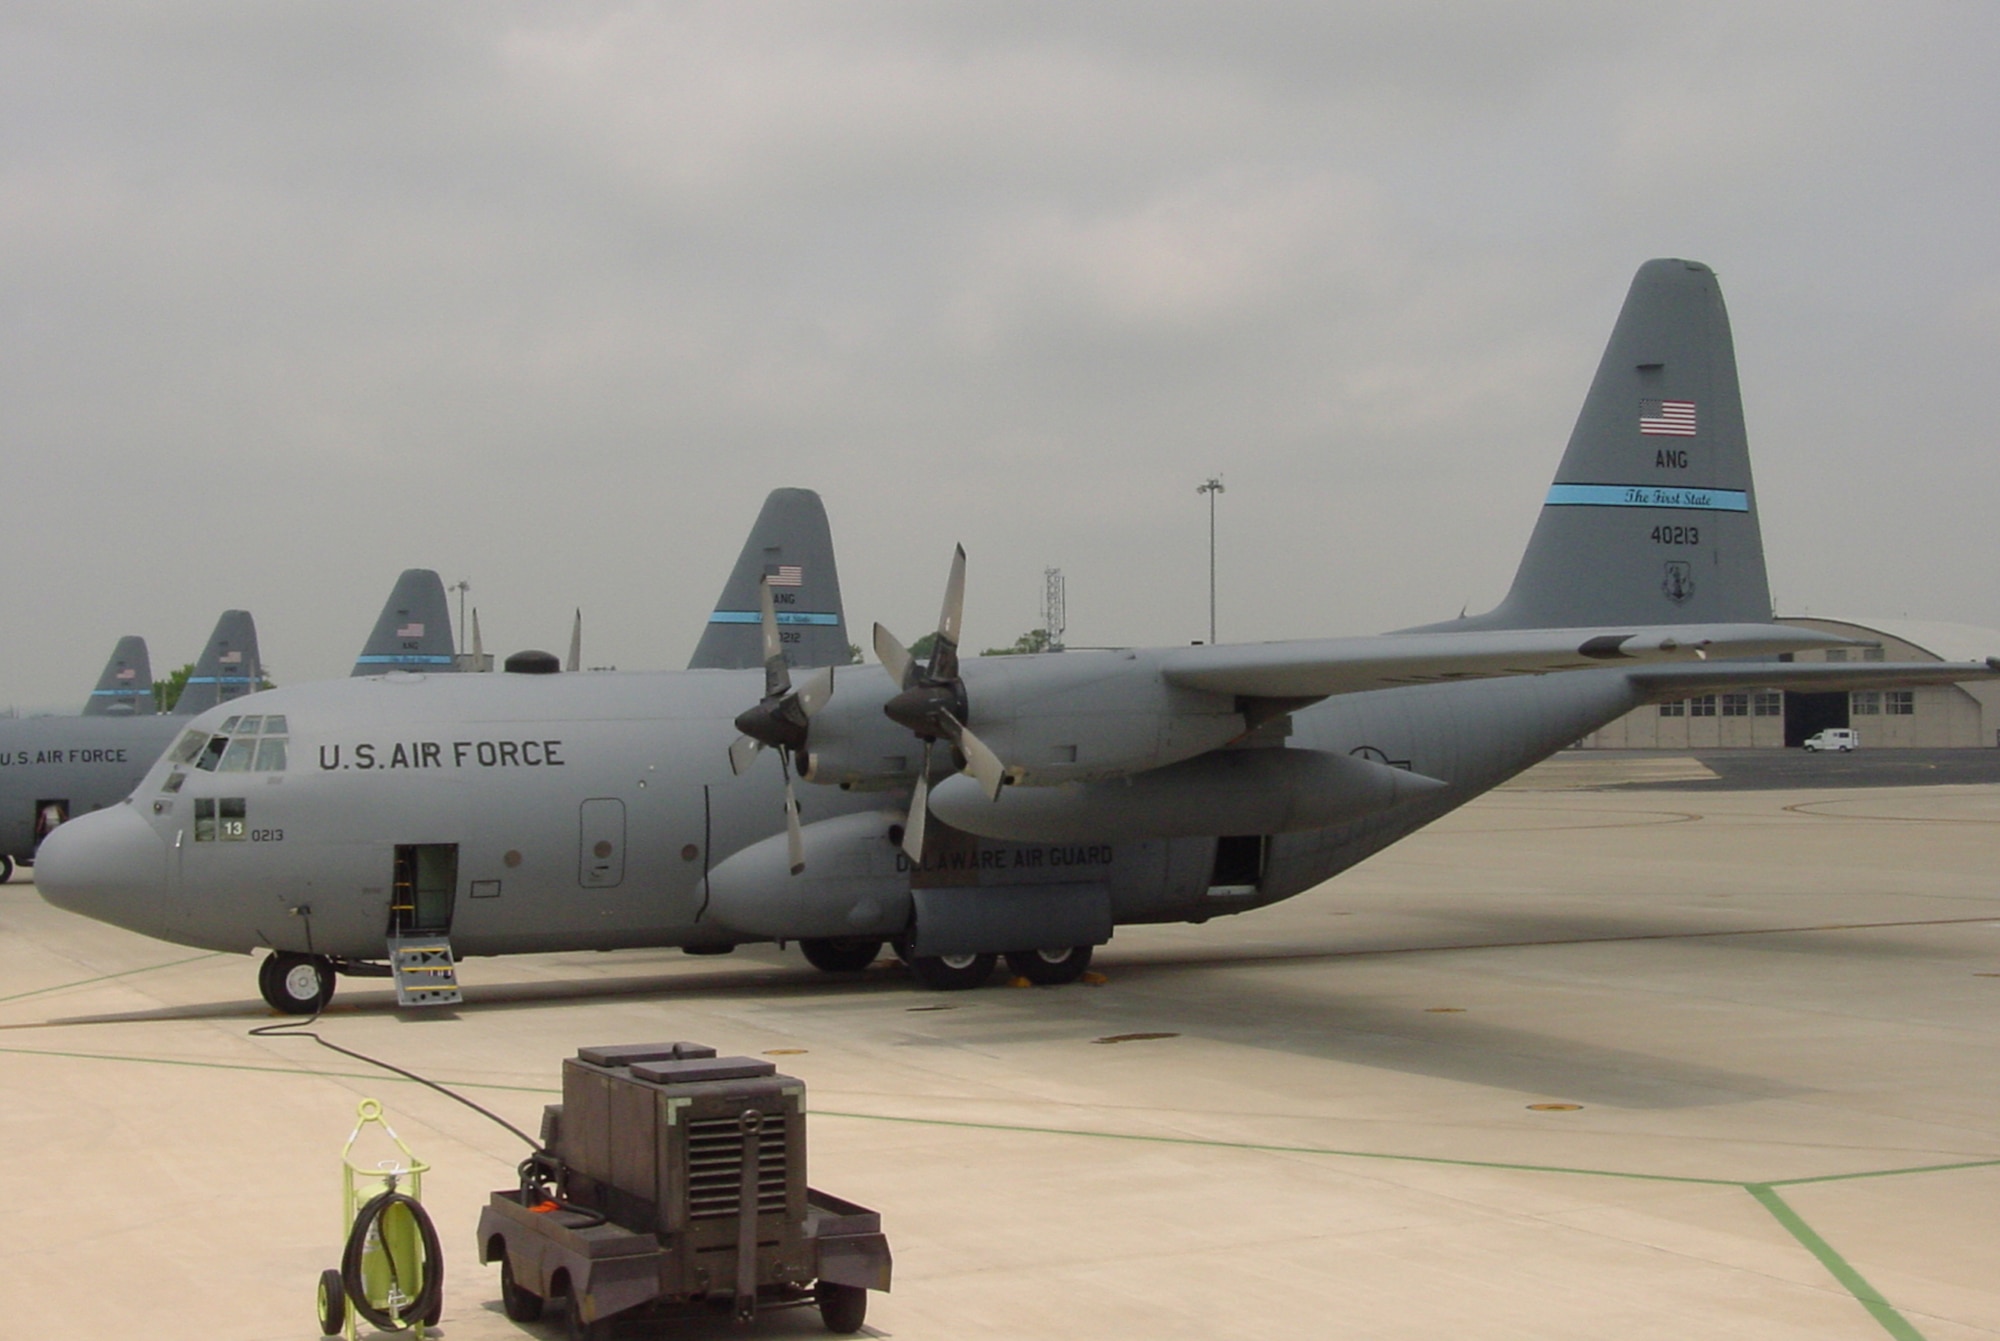 Aircraft # 213, Delaware Air National Guard, parked on the ramp at New Castle air base, Del., after passing the 10,000 flying hour milestone on June 5, 2008, becoming the first C-130 aircraft in the unit to pass this mark since the fleet arrived in the mid-1980s.